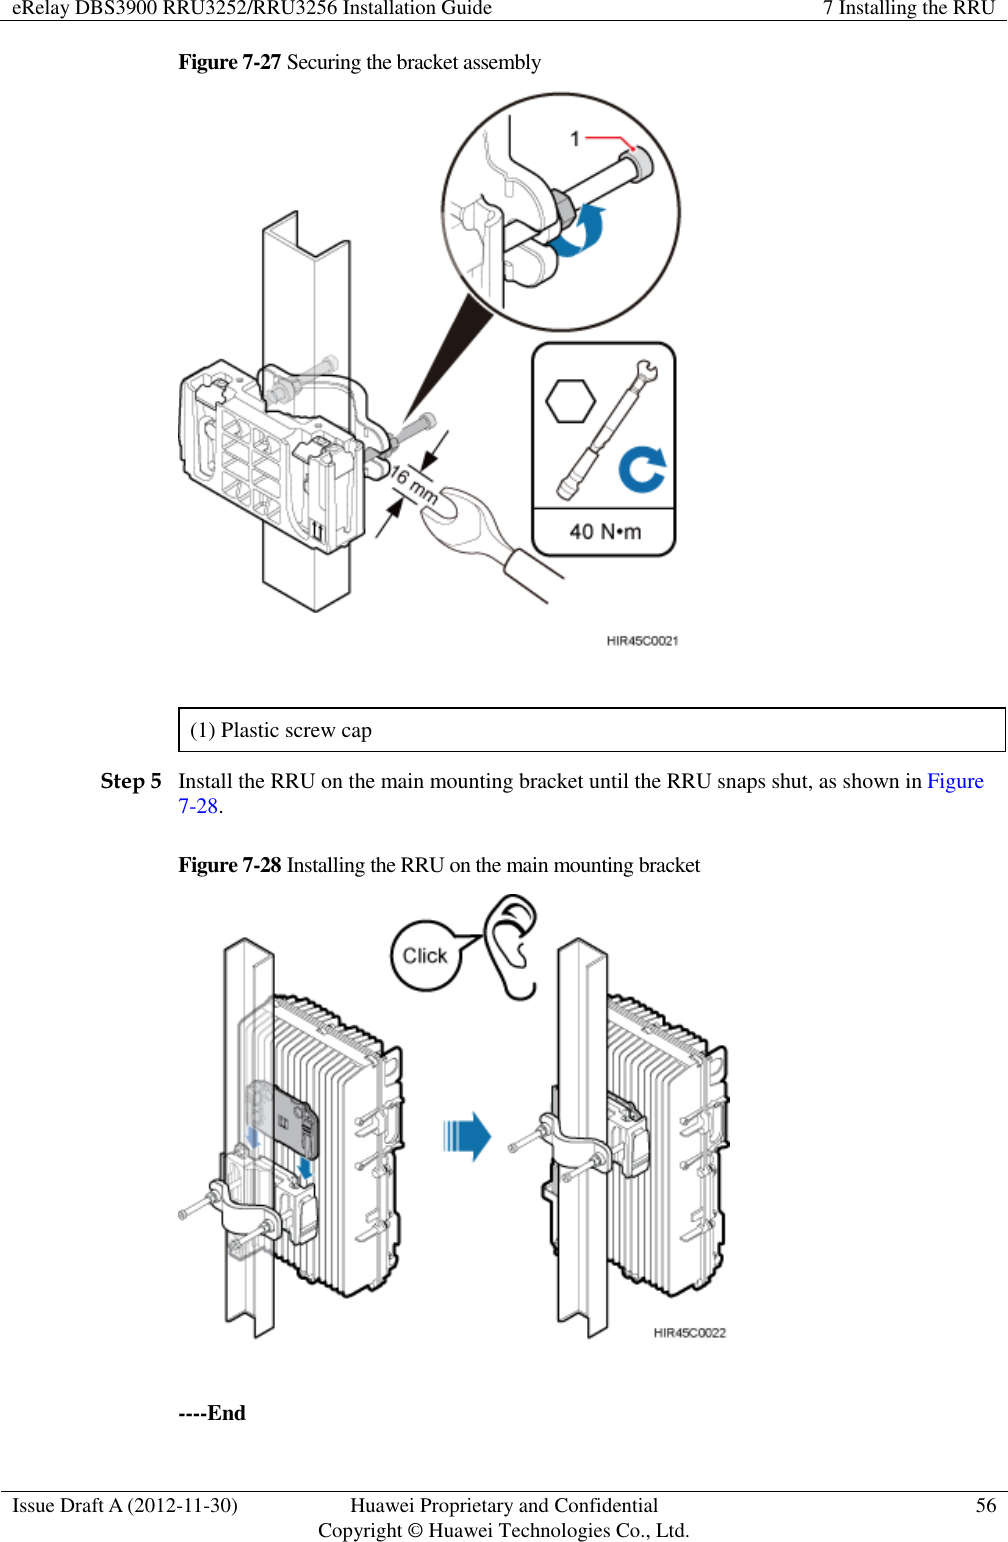 eRelay DBS3900 RRU3252/RRU3256 Installation Guide 7 Installing the RRU  Issue Draft A (2012-11-30) Huawei Proprietary and Confidential                                     Copyright © Huawei Technologies Co., Ltd. 56  Figure 7-27 Securing the bracket assembly   (1) Plastic screw cap Step 5 Install the RRU on the main mounting bracket until the RRU snaps shut, as shown in Figure 7-28. Figure 7-28 Installing the RRU on the main mounting bracket   ----End 